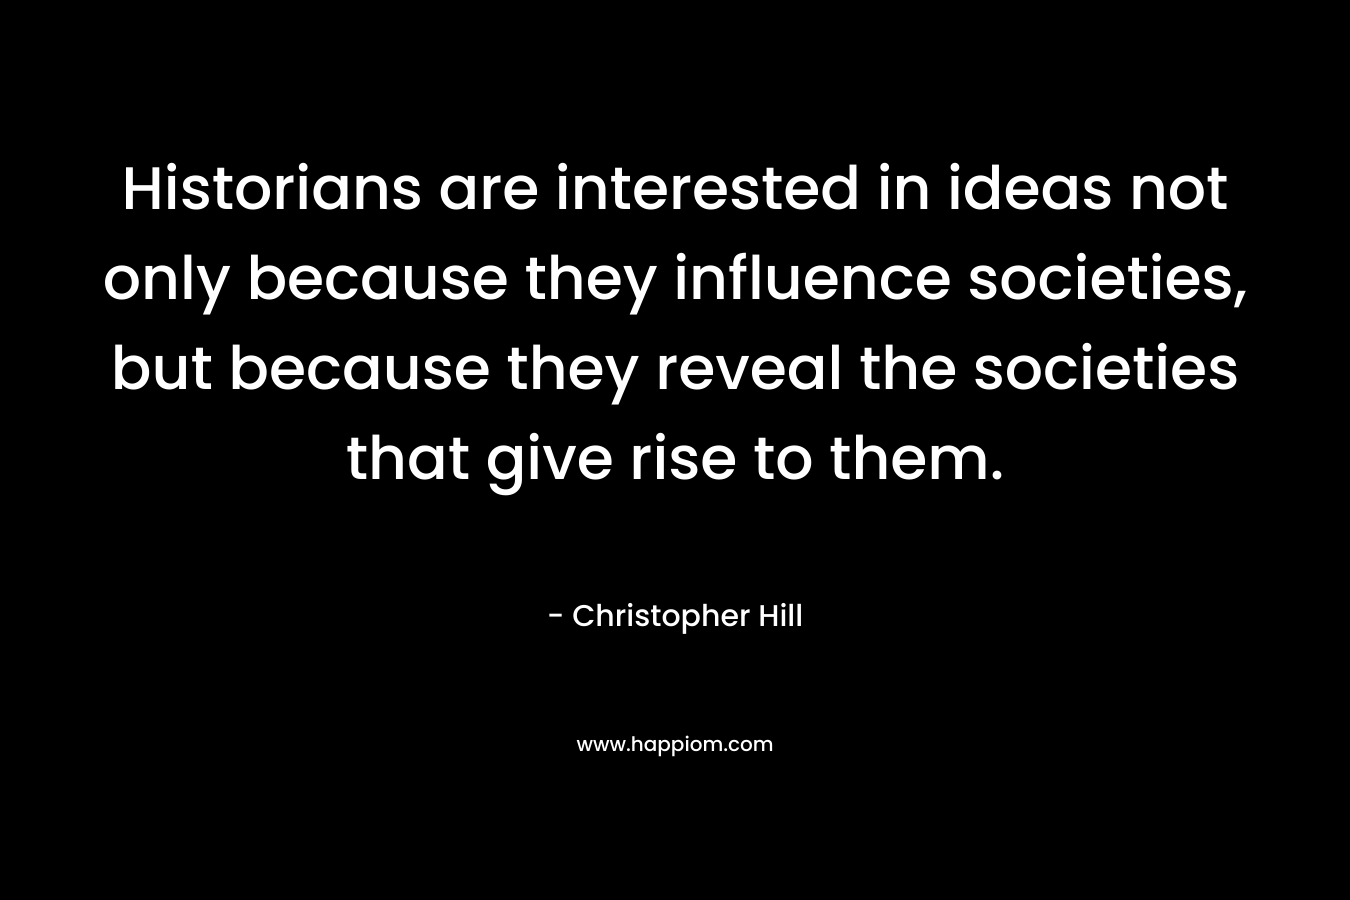 Historians are interested in ideas not only because they influence societies, but because they reveal the societies that give rise to them. – Christopher Hill